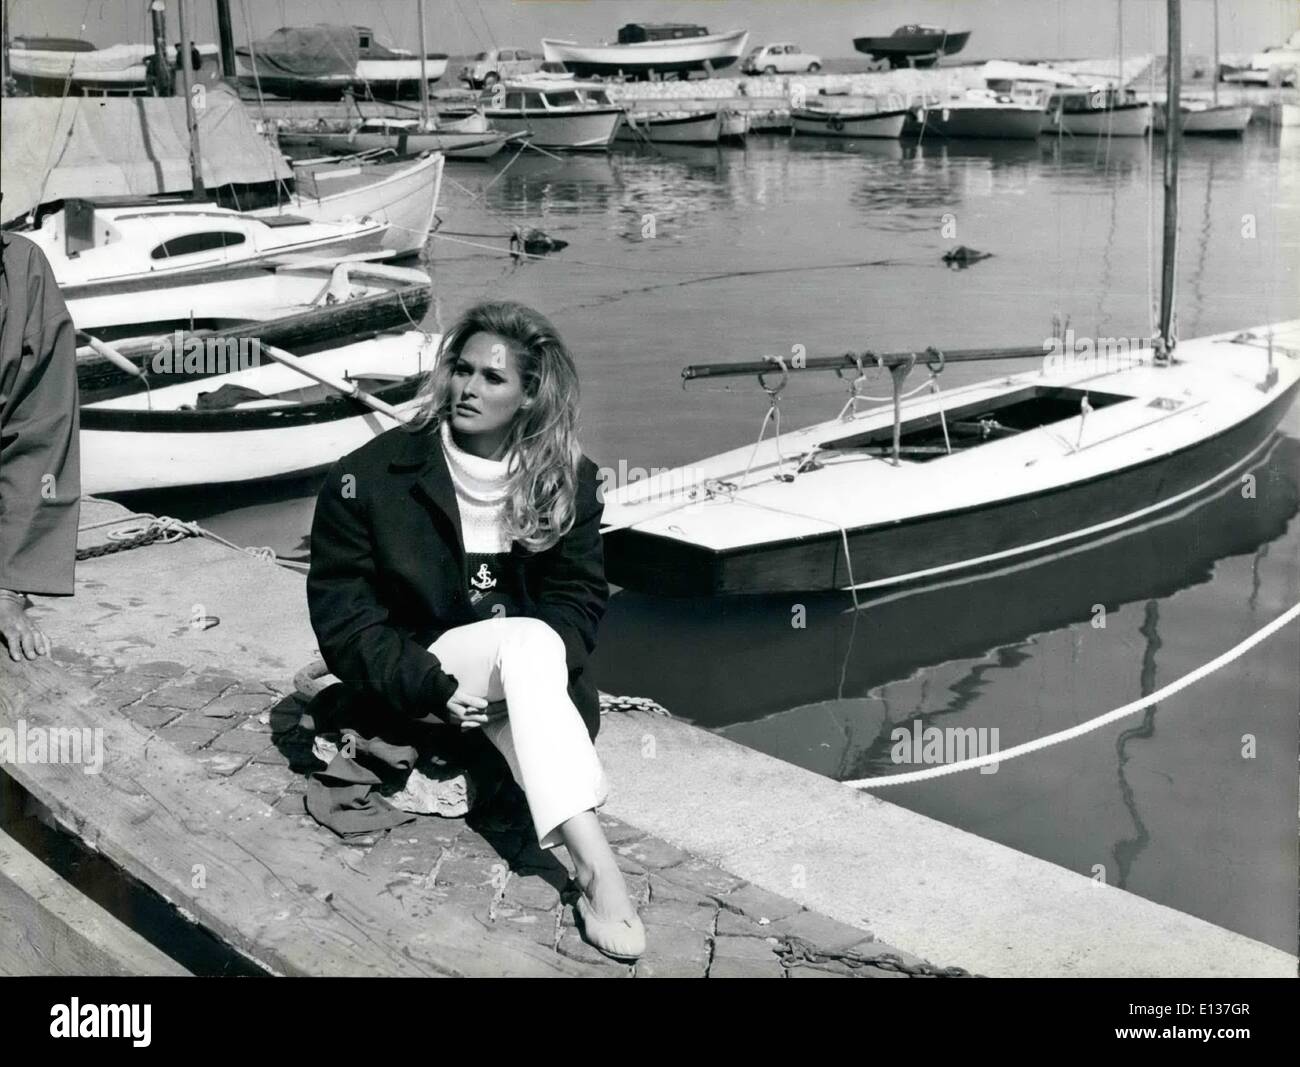 Feb. 29, 2012 - Ursula Andress comes back to Rome.: Blonde-beautiful Swiss actress Ursula Andress partner of Sean Connery in James Bond series came  ok to Rome yesterday. The Icy Sphynx as she it called at Hollywood lived here in Rome for several years before to begin her billant movie career. She had many friends here and  declared to be happy to see again the gardens and beautiful things there are in Rome. She was pictured this morning at Anzio where she opens an happy rest on the sunny little harbour on a yatch of some friends. Ursula will probably be filming in Rome next month. Stock Photo